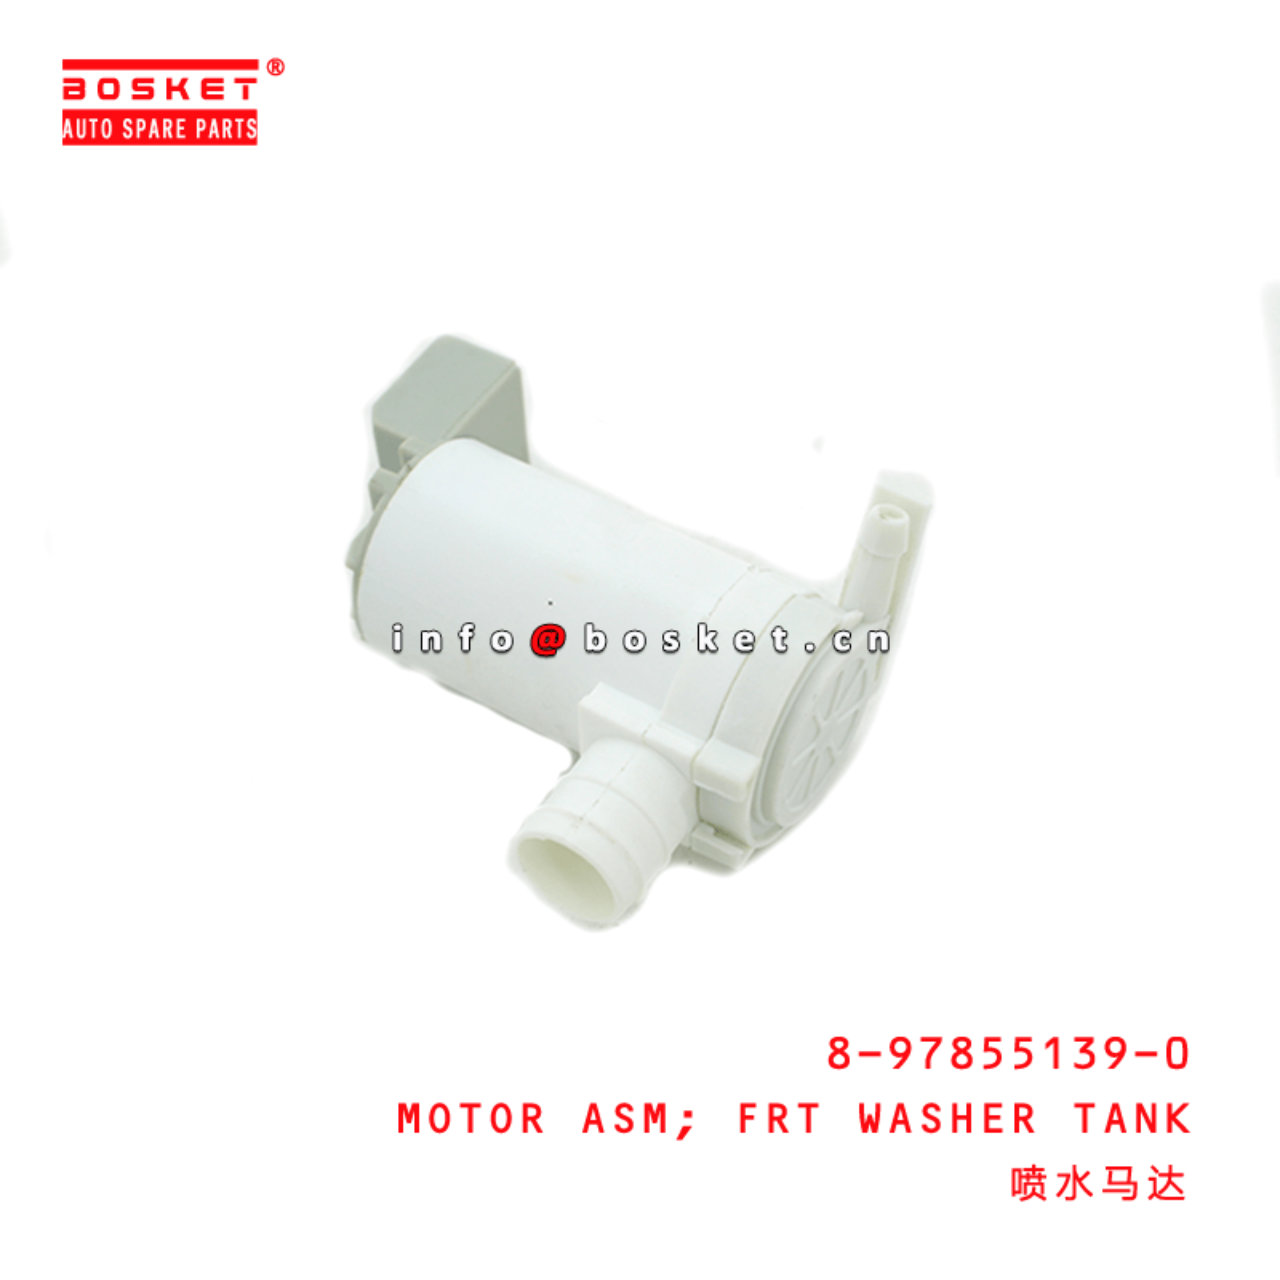  8-97855139-0 Front Washer Tank Motor Assembly 8978551390 Suitable for ISUZU 700P NPR75 NQR75 4HK1